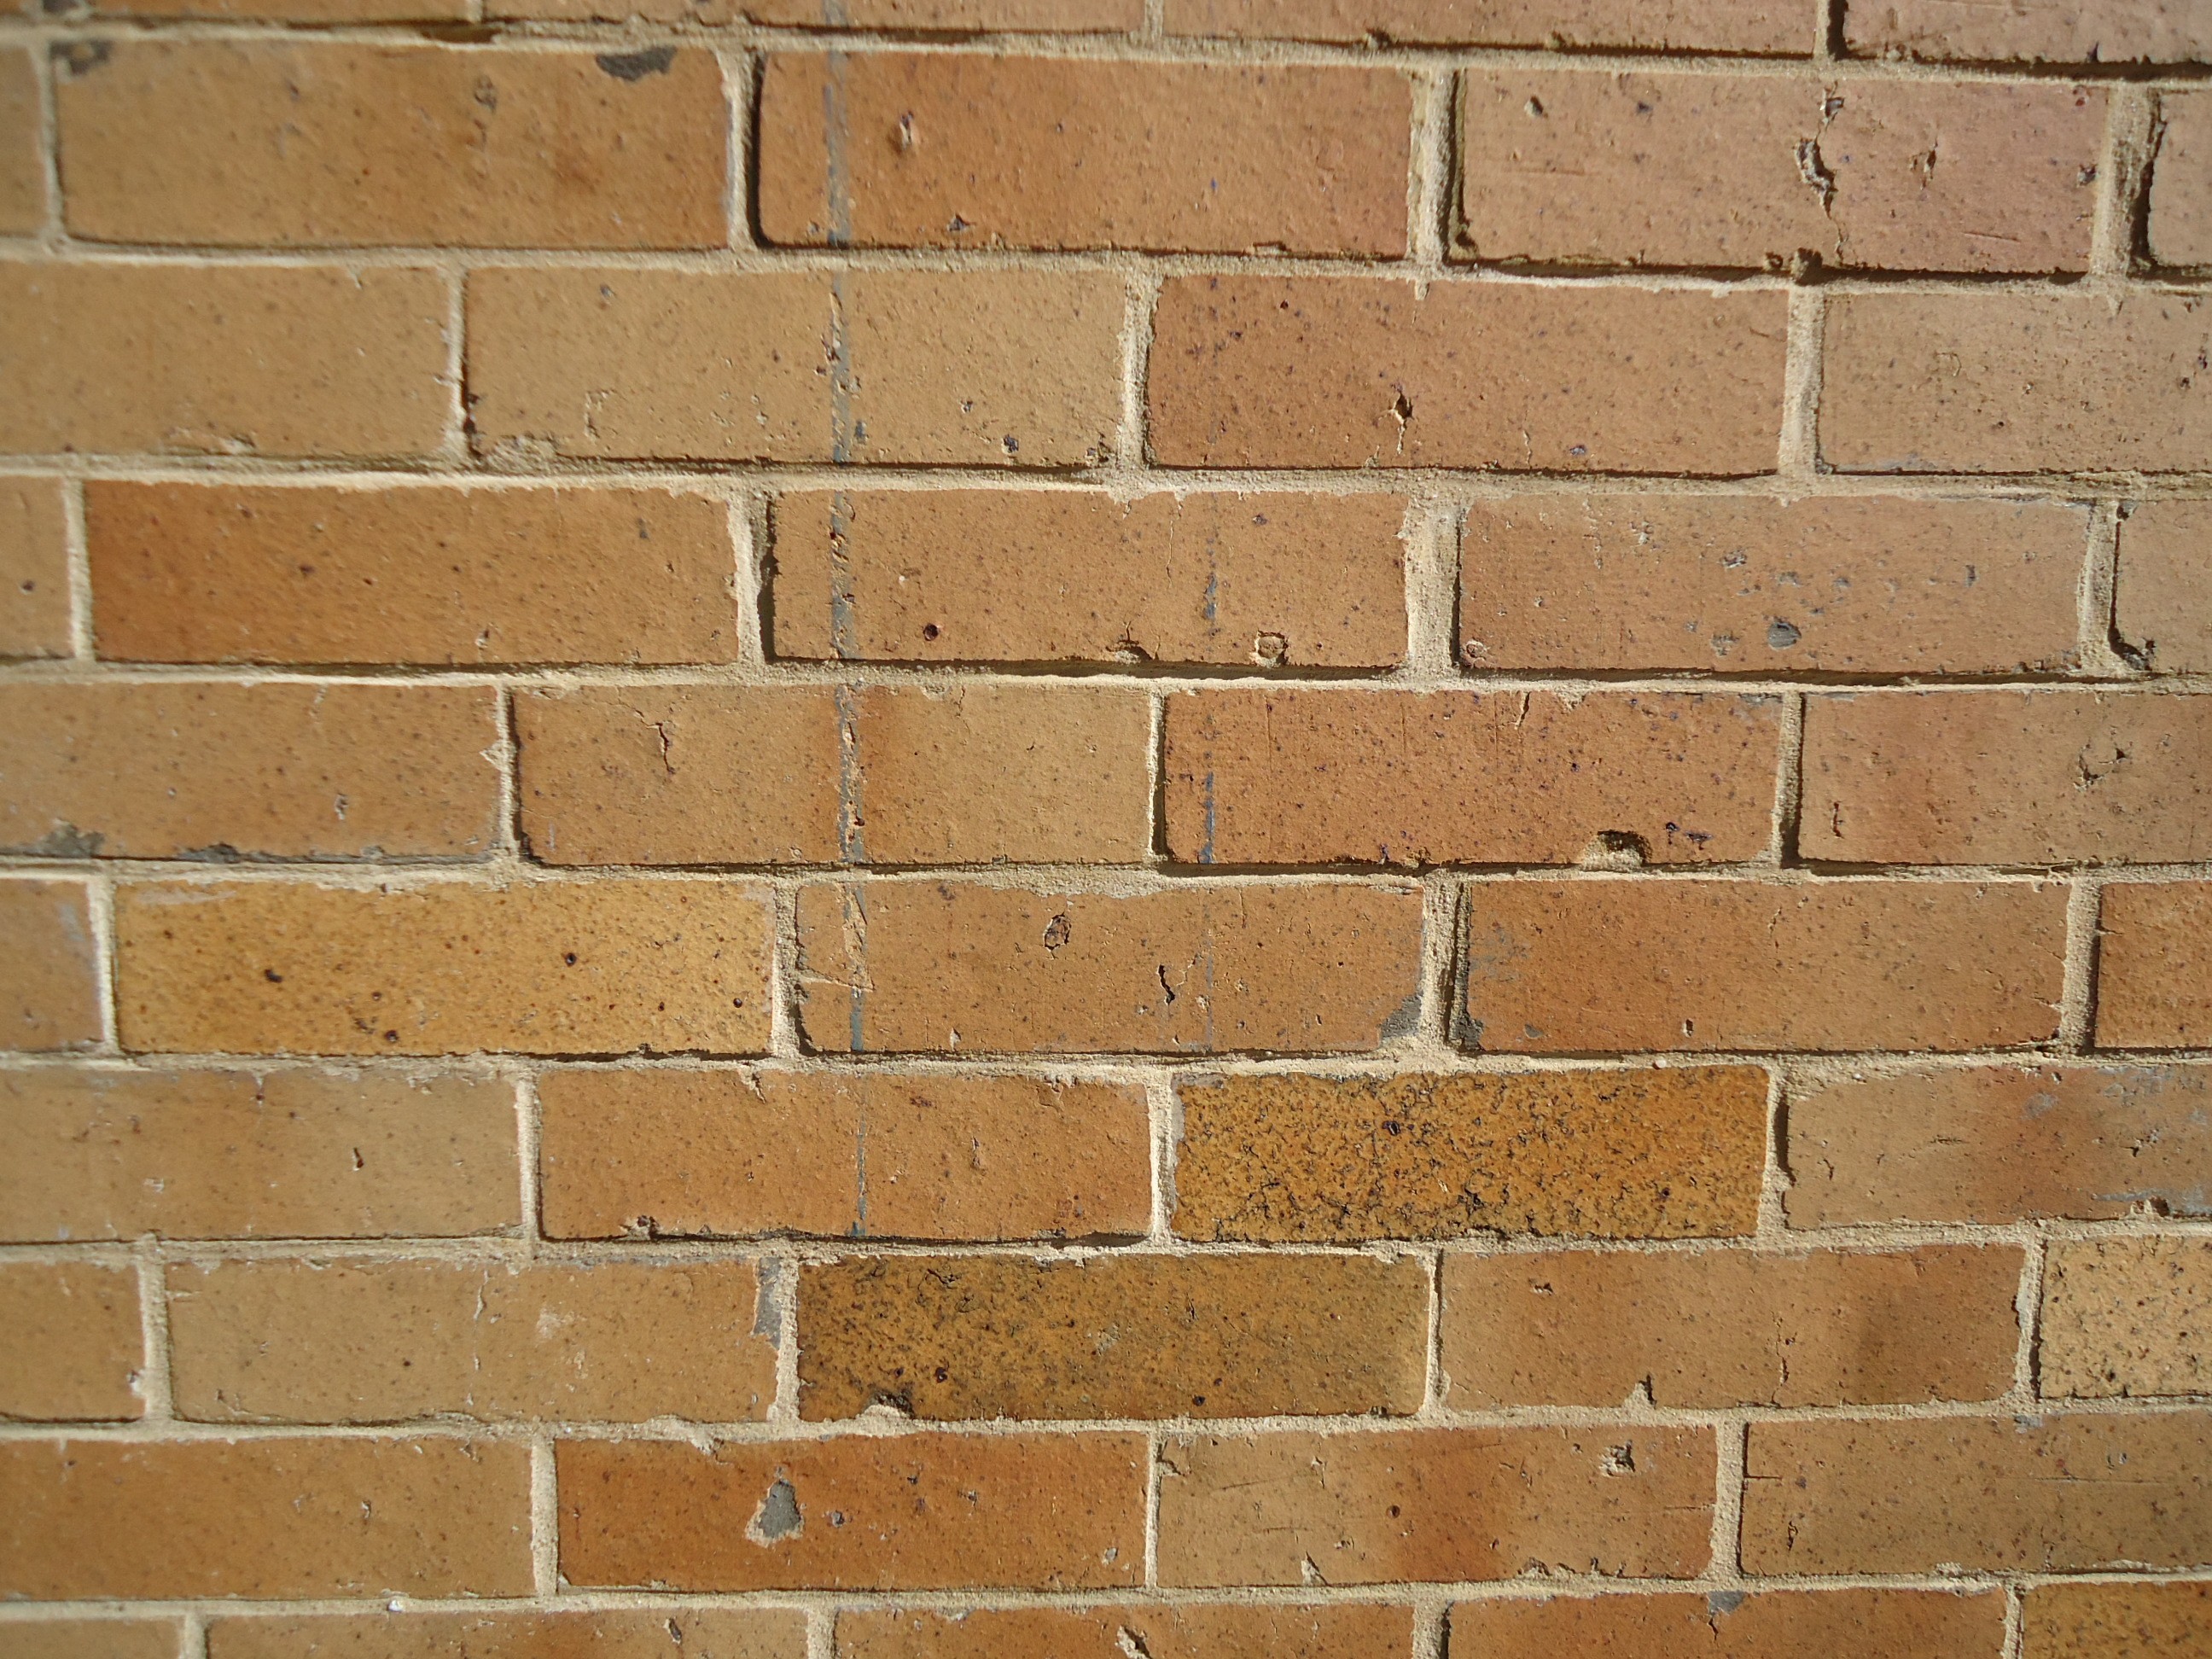 File:Surfaces vertical brick wall closeup view.JPG - Wikimedia Commons